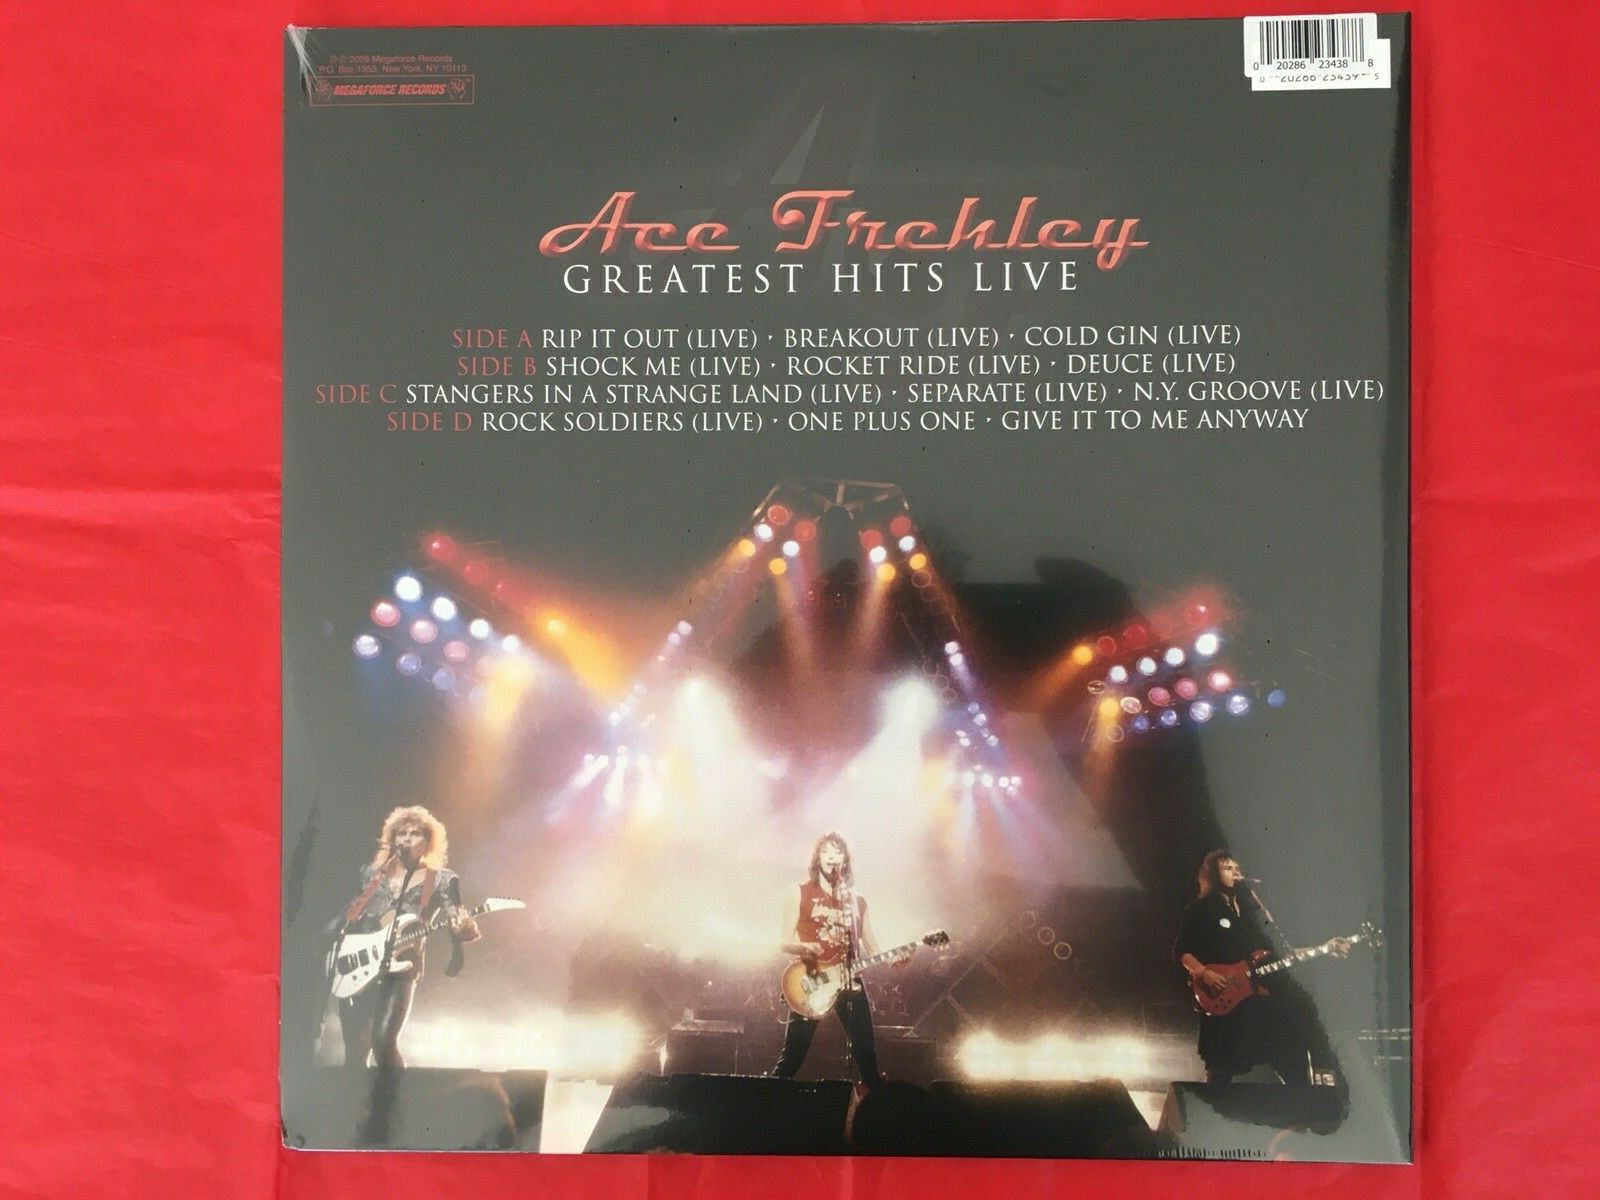 popsike.com - ACE FREHLEY of KISS "Greatest Hits Live" GLOW IN THE DARK  COLORED Vinyl 2 LP New - auction details